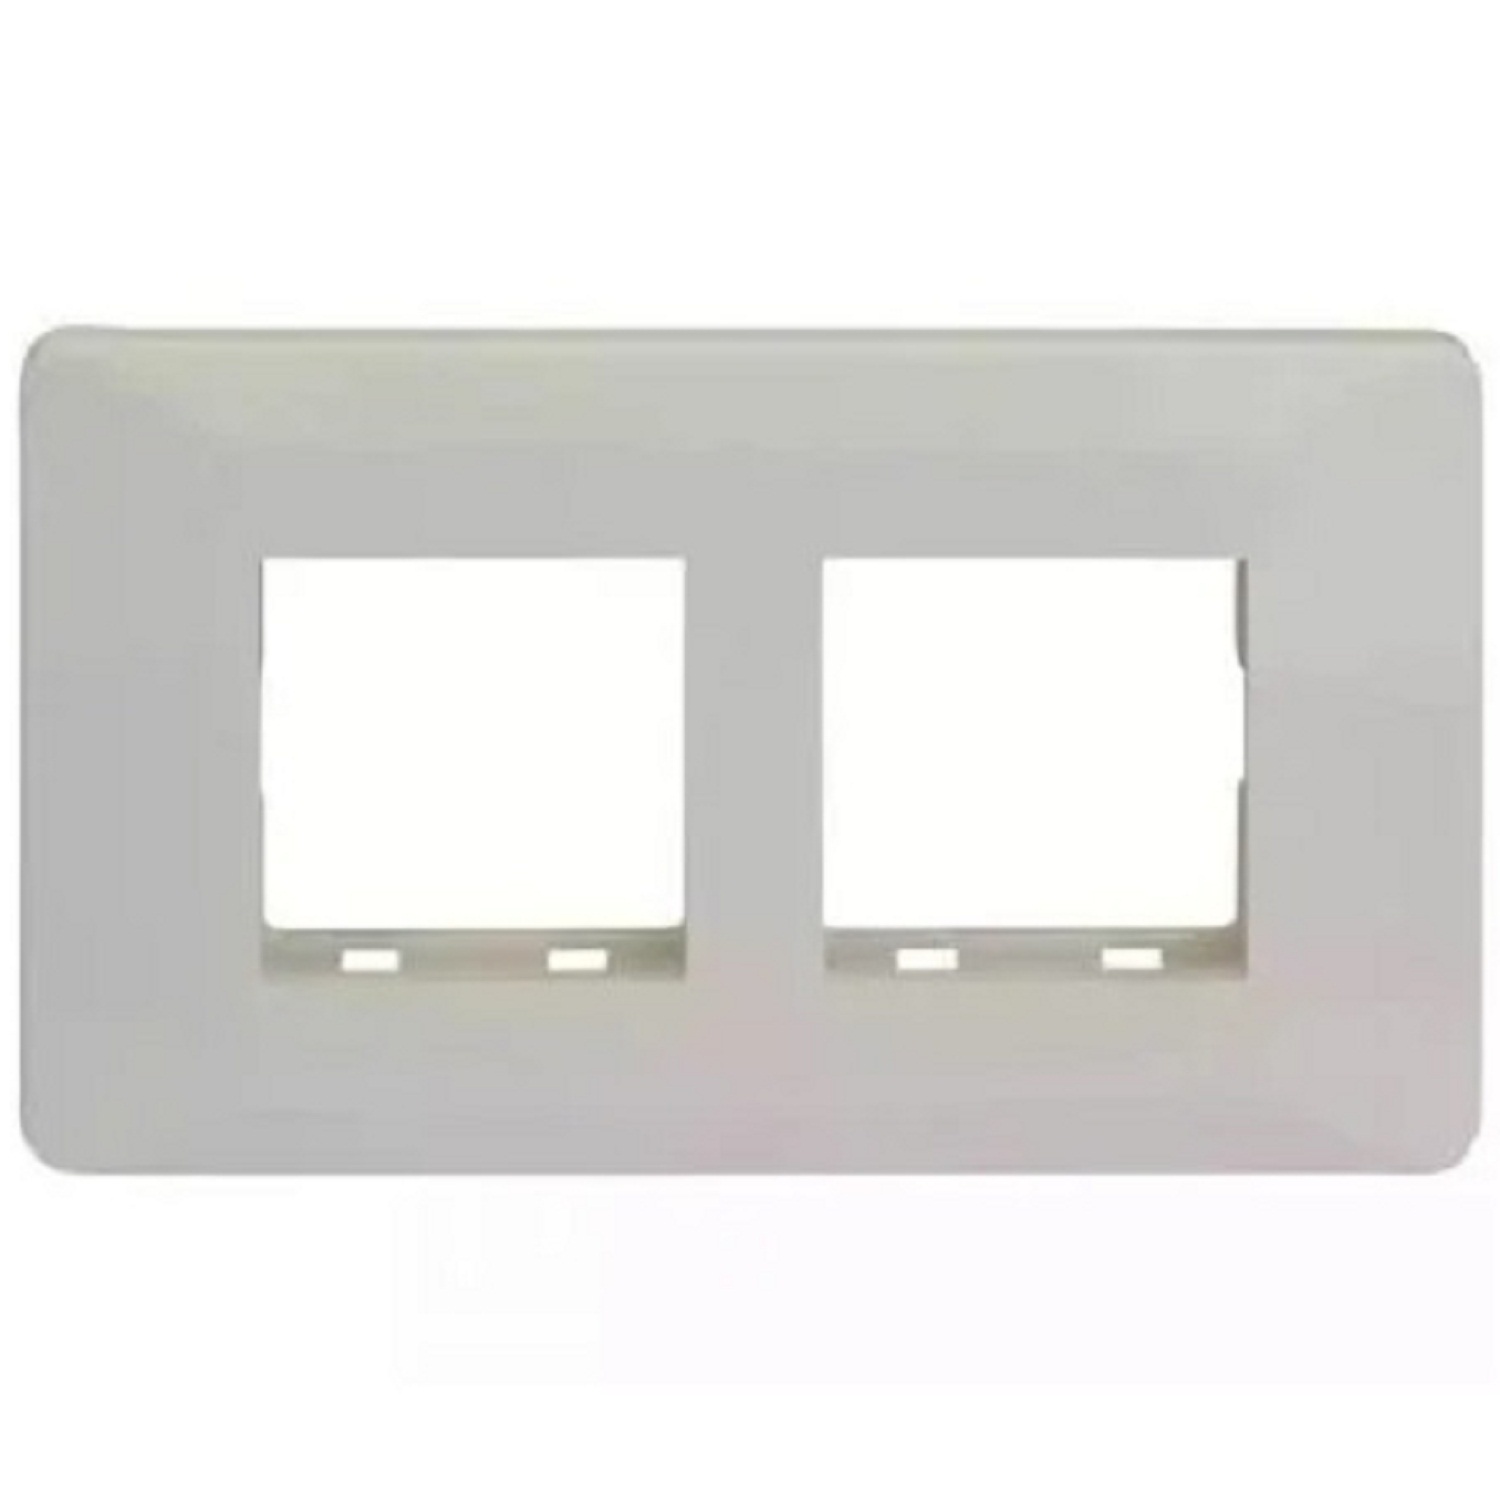 LT Entice 4 Module (Regular) Cover Plate with Base Frame - White